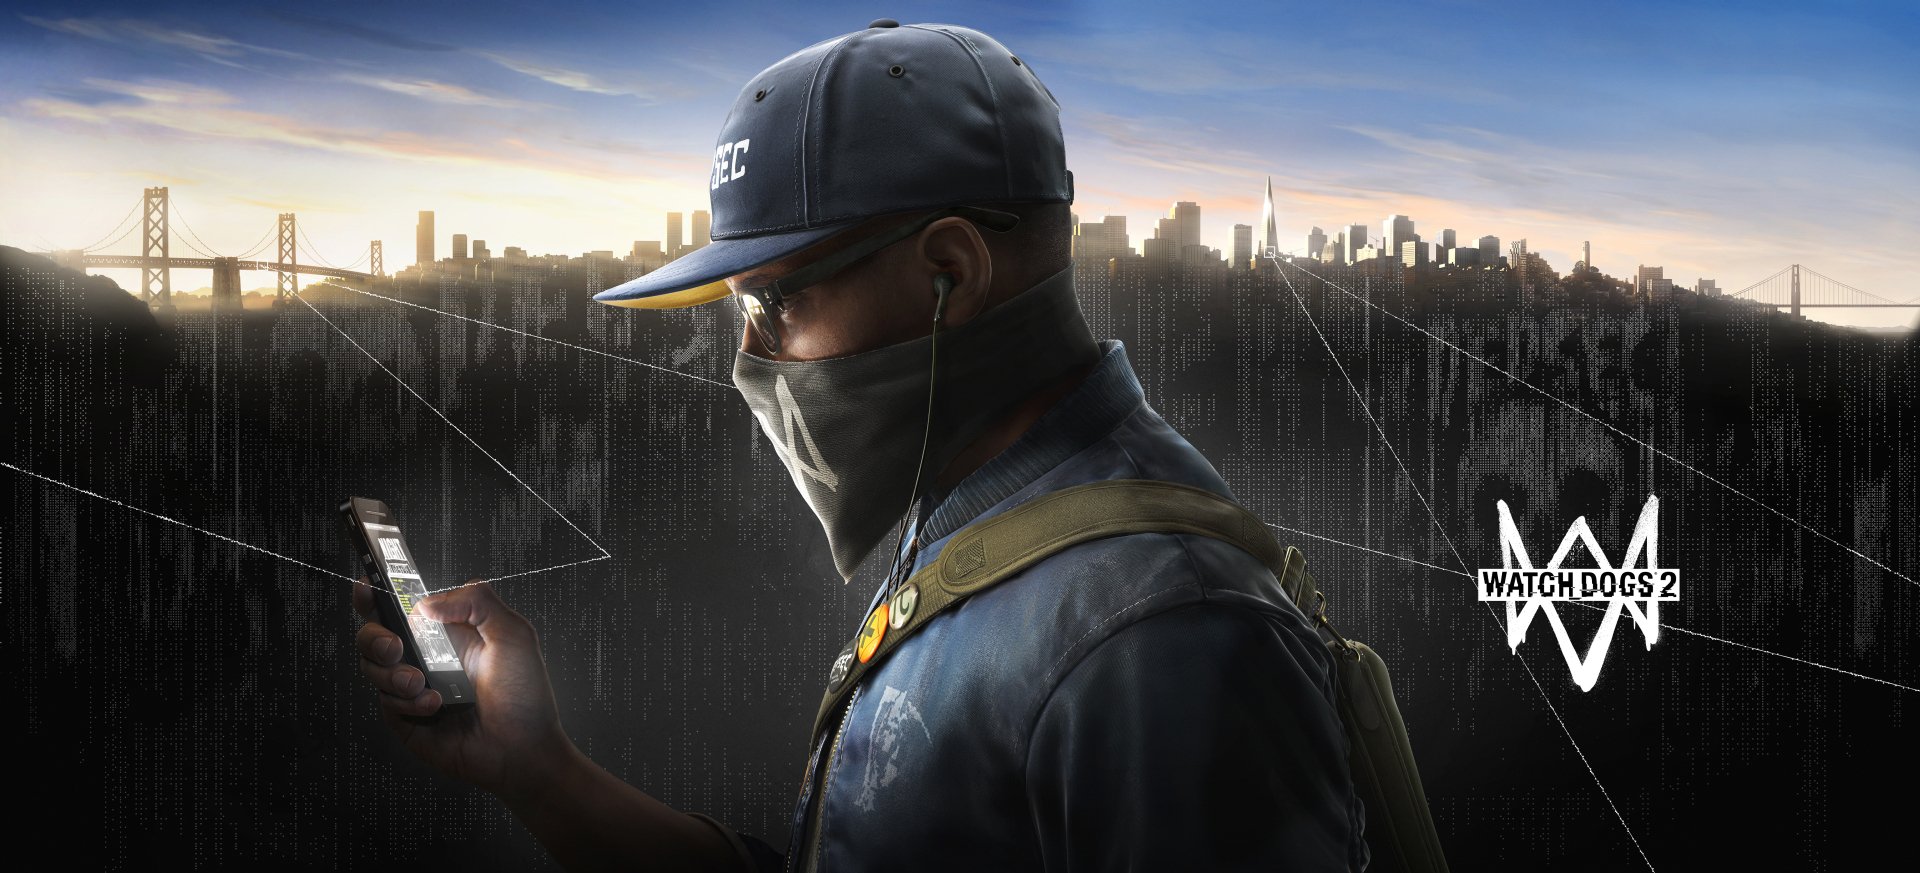 uplay pc download for watch dogs 2